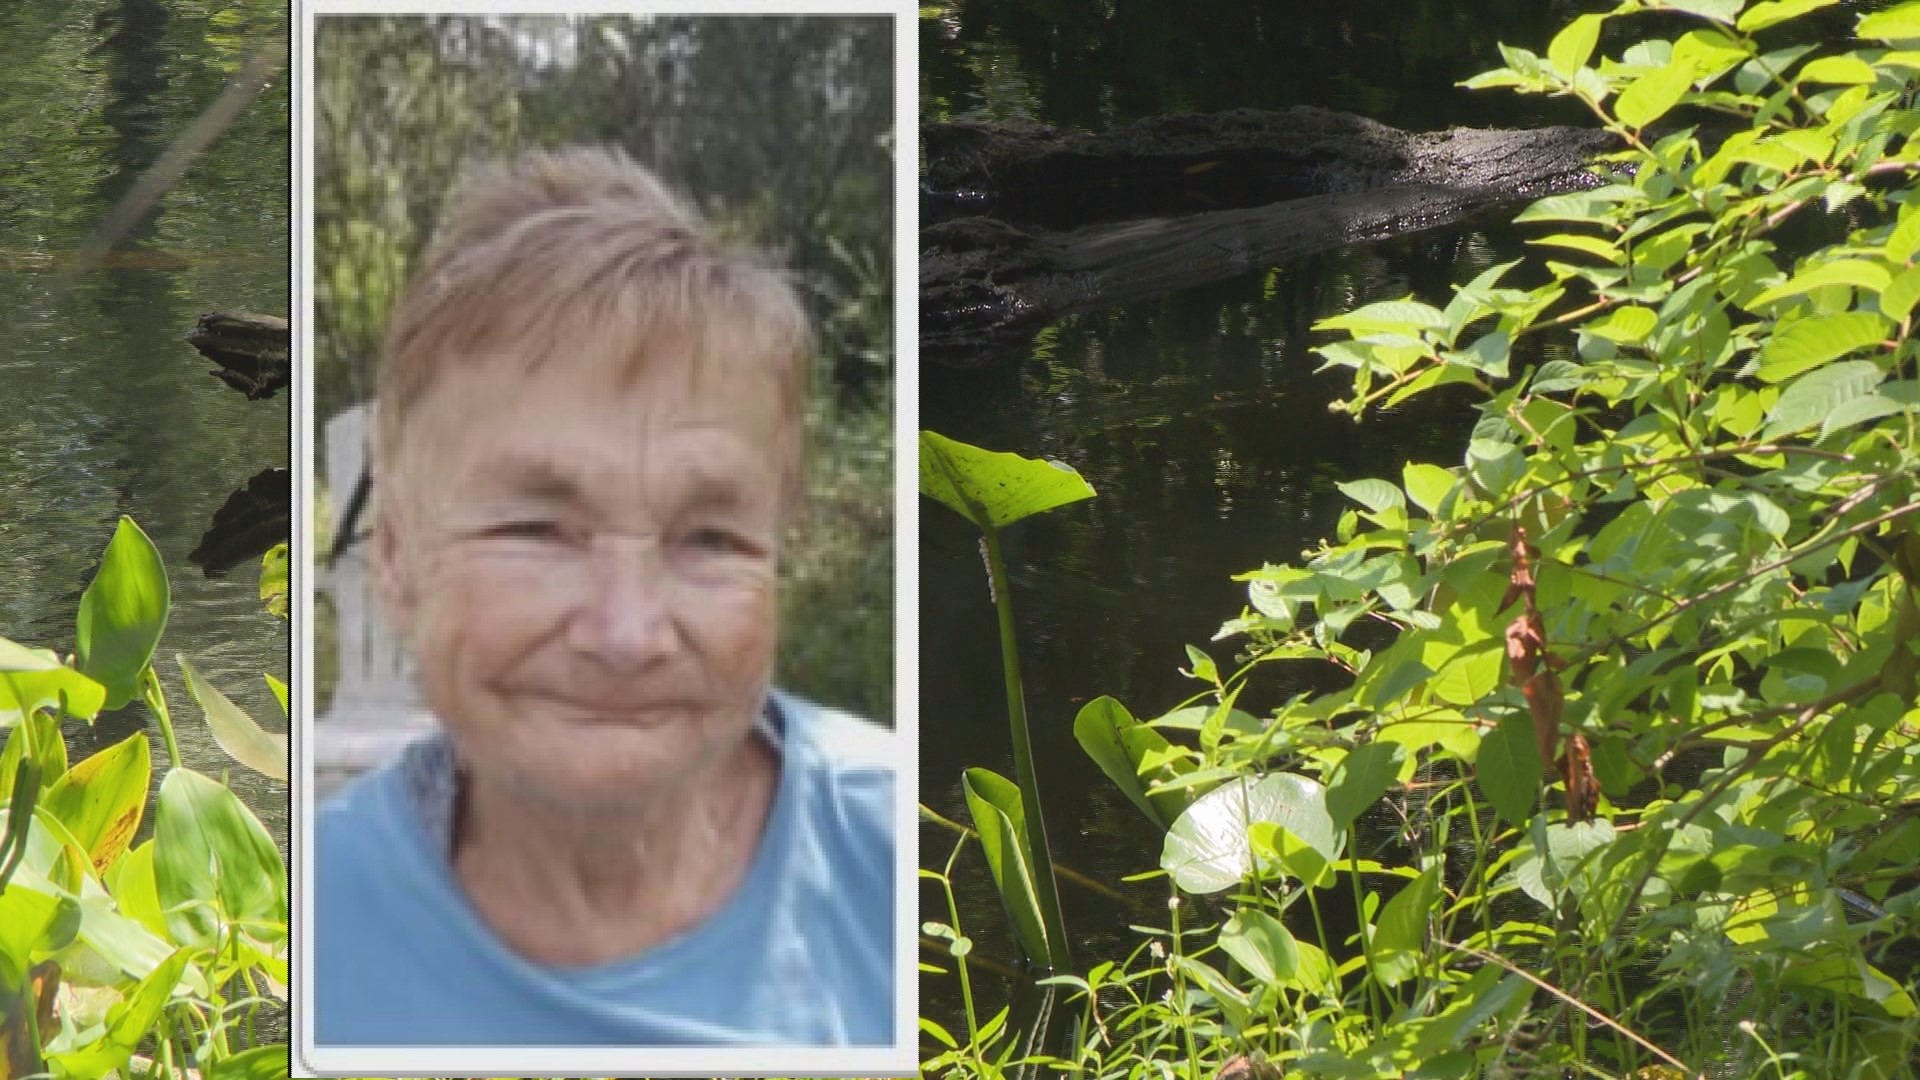 The Putnam County Sheriff's Office said the body of 78-year-old Rose Dye was found floating in the water by a wildlife photographer on Monday.